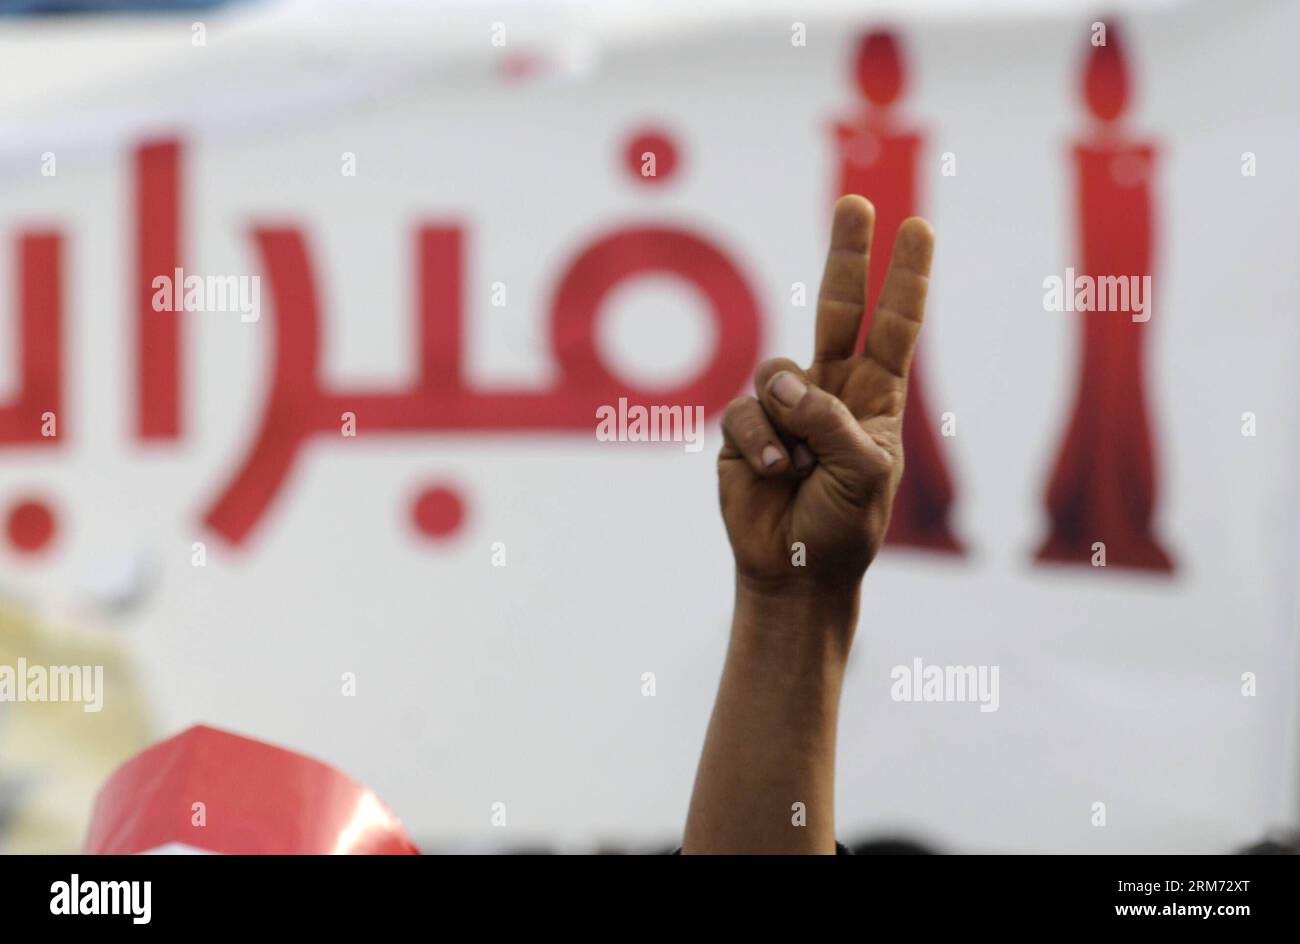 (140211) -- SANAA, Feb. 11, 2014 (Xinhua) -- A man gestures the victory salute as he takes part in a celebration event in Sanaa, Yemen, on Feb. 11, 2014. Tens of thousands of Yemeni people participated in the event commemorating the third anniversary of the 2011 revolution that forced former president Ali Abdullah Saleh to step down. (Xinhua/Mohammed Mohammed) YEMEN-SANAA-REVOLUTION-ANNIVERSARY-CELEBRATION PUBLICATIONxNOTxINxCHN   Sanaa Feb 11 2014 XINHUA a Man gestures The Victory Salute As he Takes Part in a Celebration Event in Sanaa Yemen ON Feb 11 2014 Tens of thousands of Yemeni Celebrit Stock Photo